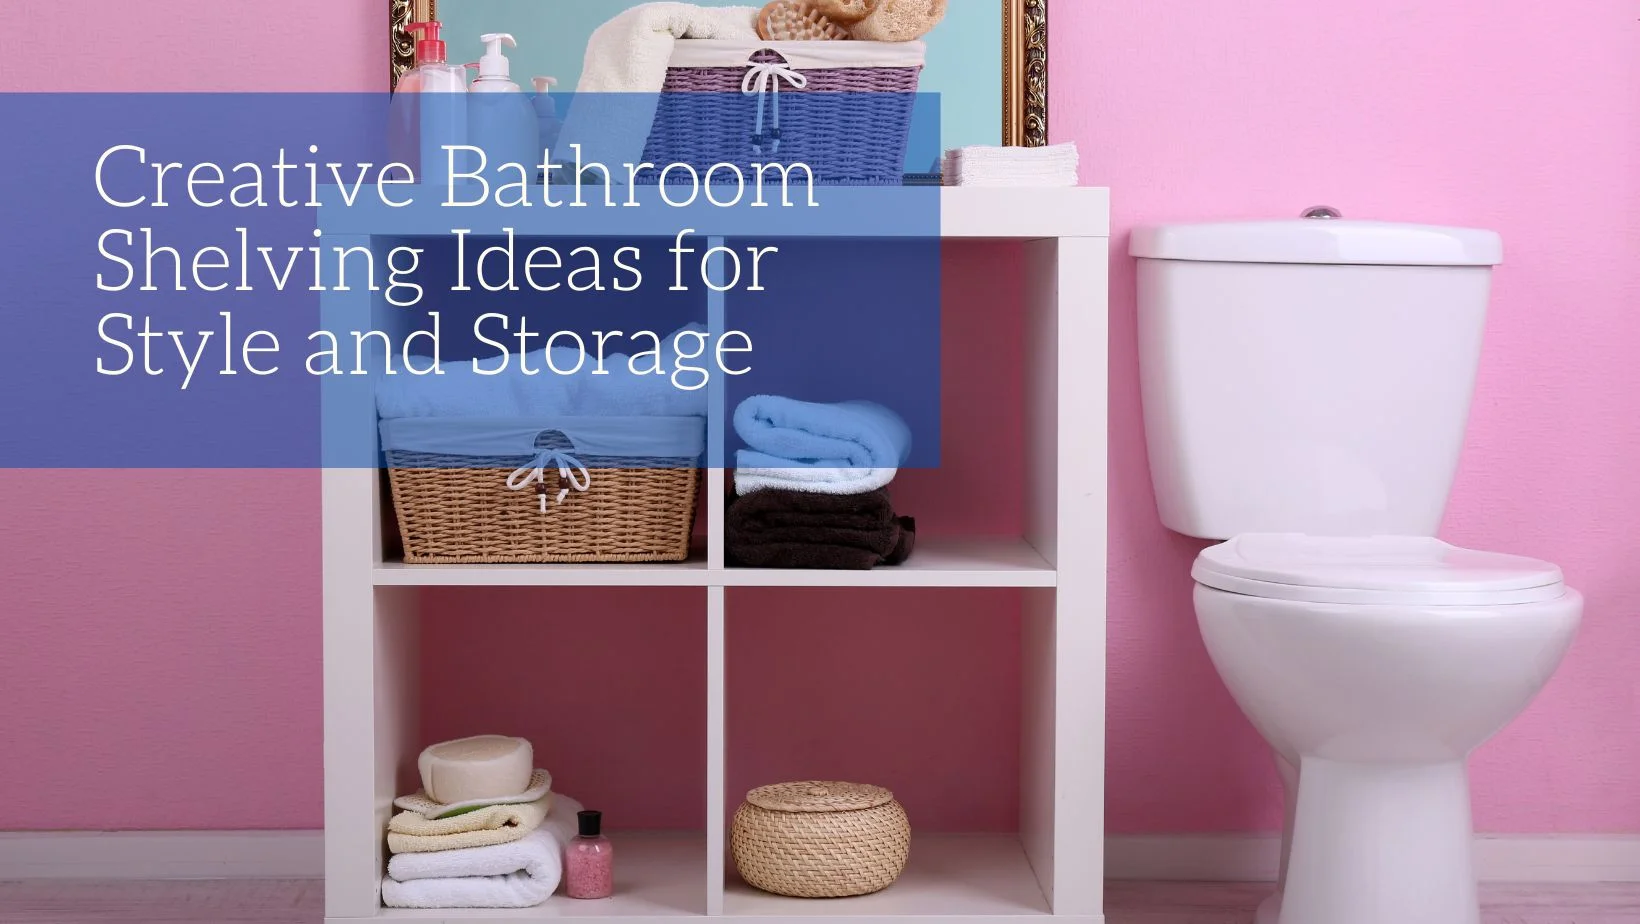 Creative Bathroom Shelving Ideas for Style and Storage